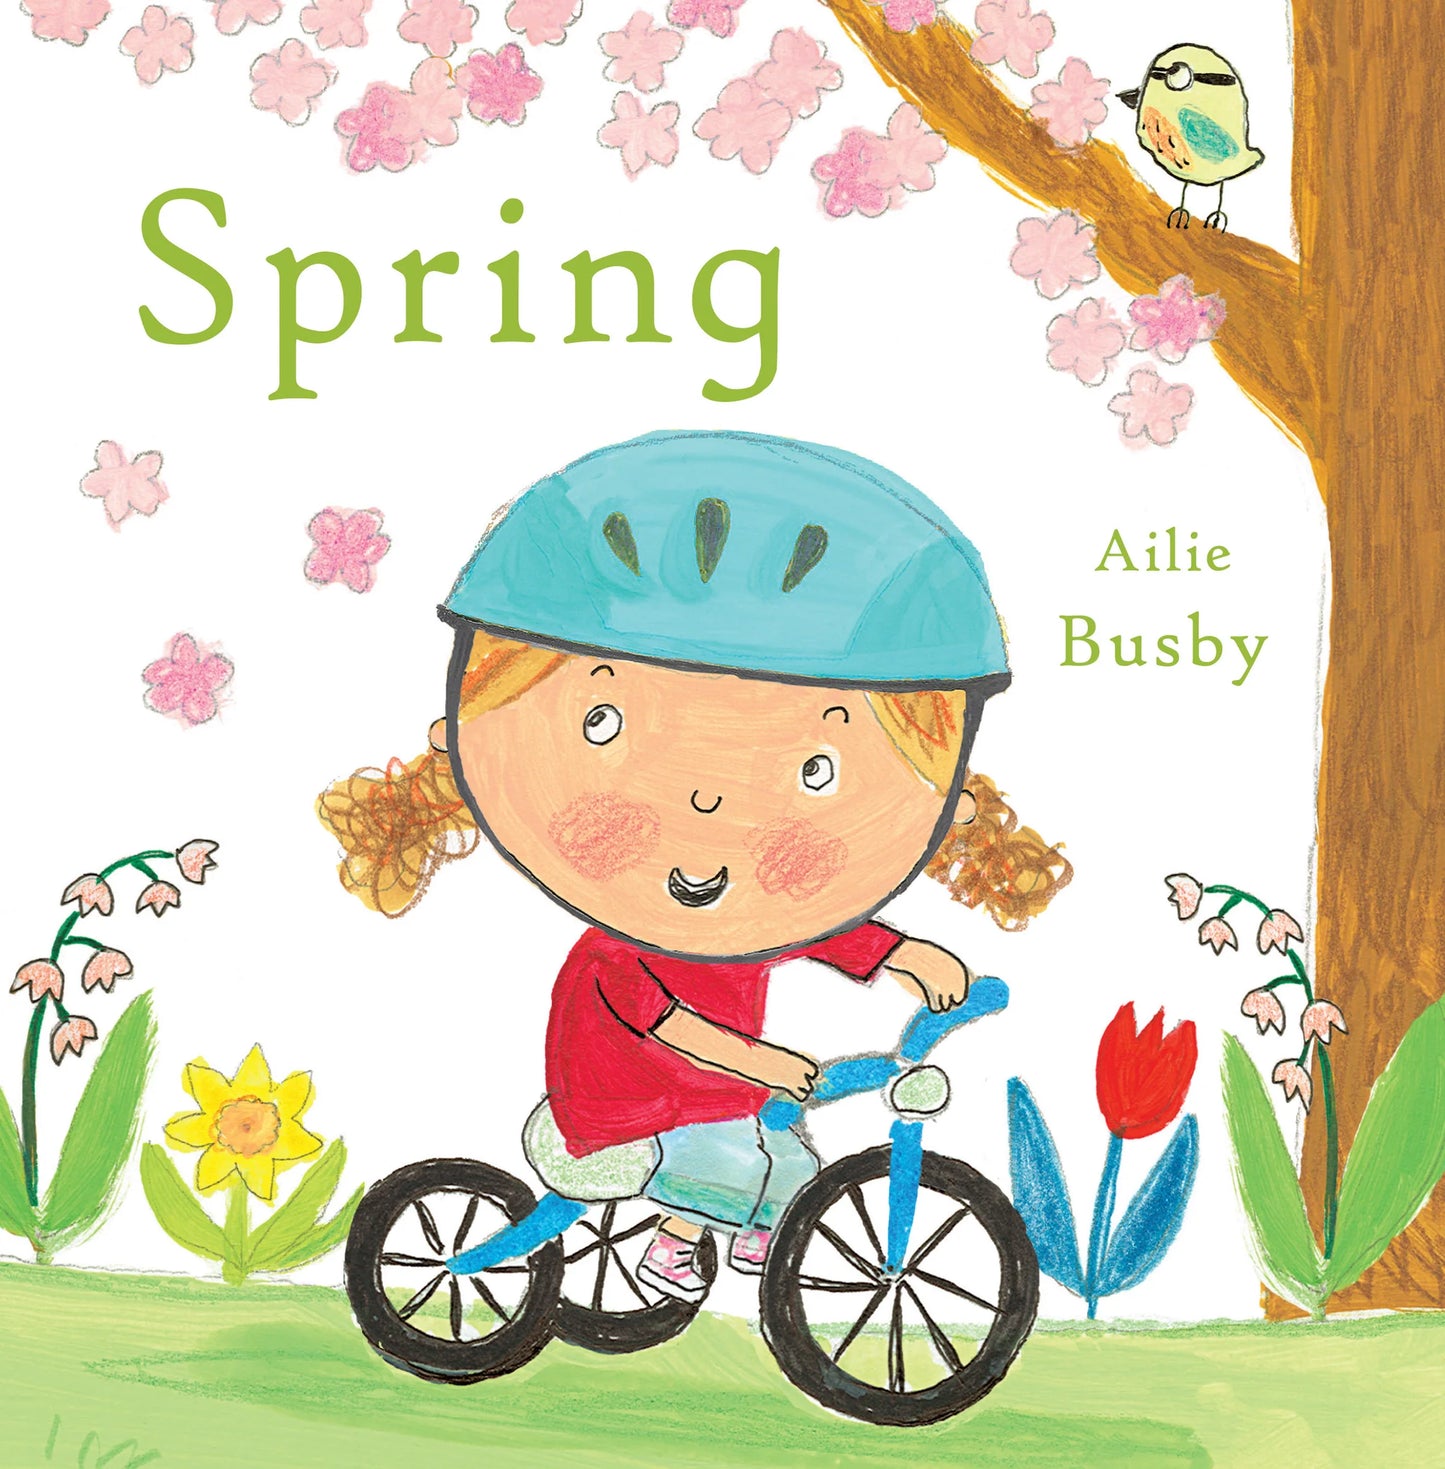 Child’s Play, season books, spring, books about spring, Child’s Play stockist, Nottinghamshire stockist, board books, children’s books, Easter Gifts For Babies, Easter Gifts For Kids, Easter Gifts UK